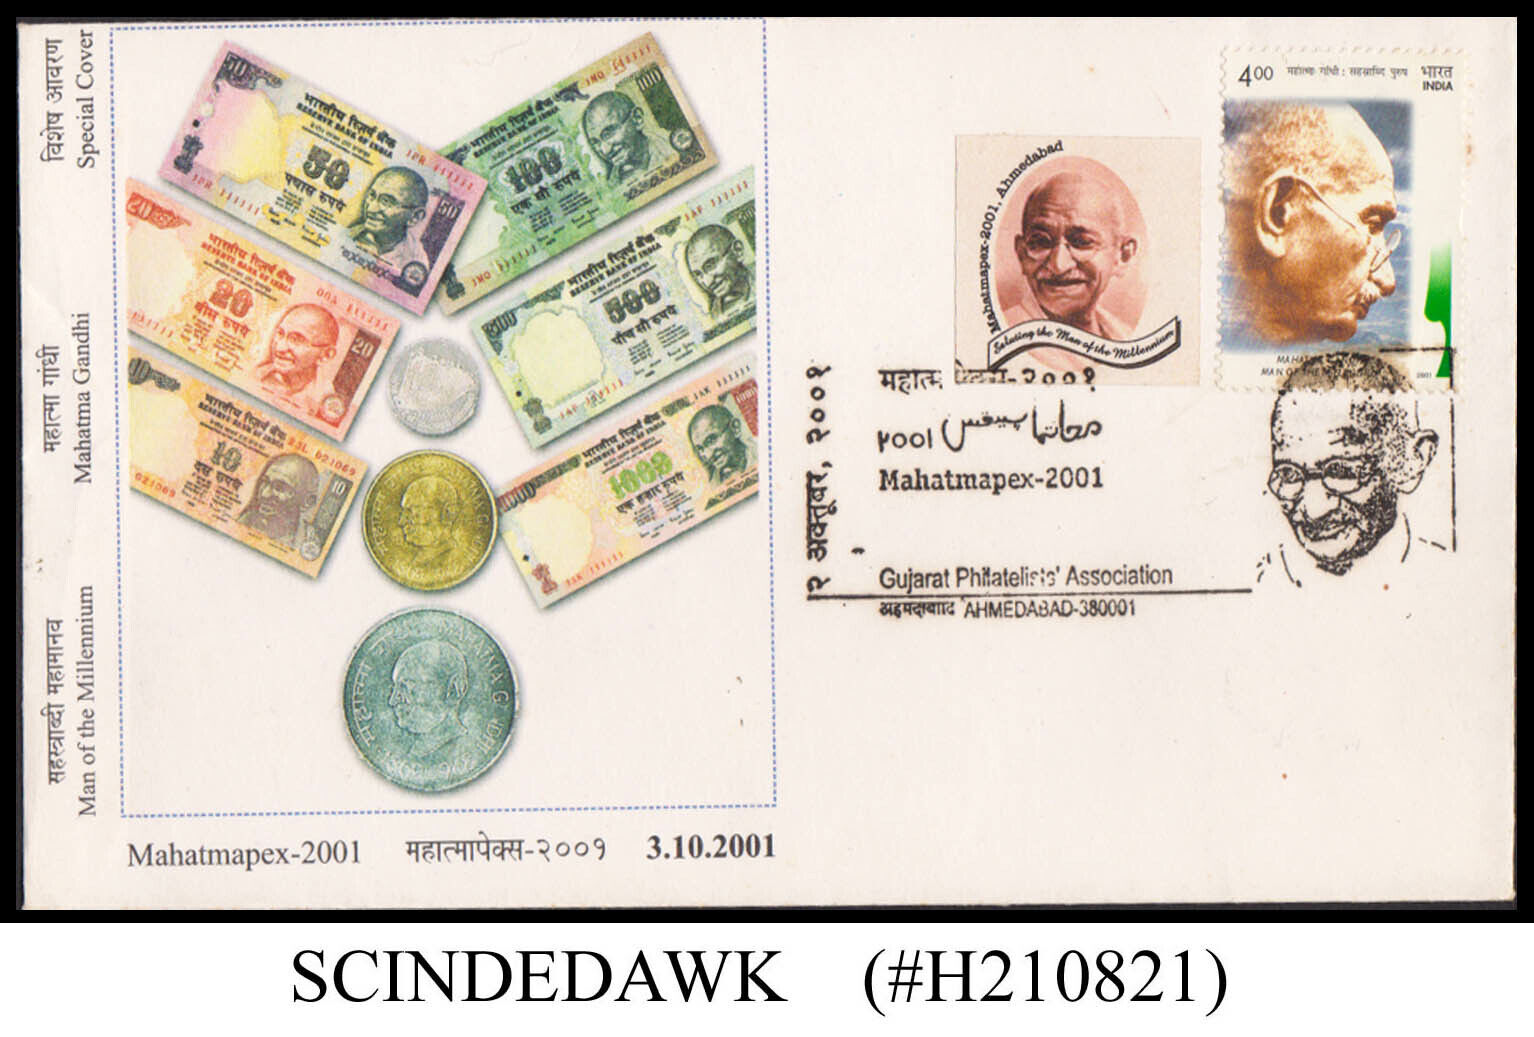 INDIA - 2001 MAHATMAPEX / GANDHI SPECIAL COVER WITH SPECIAL CANCL.